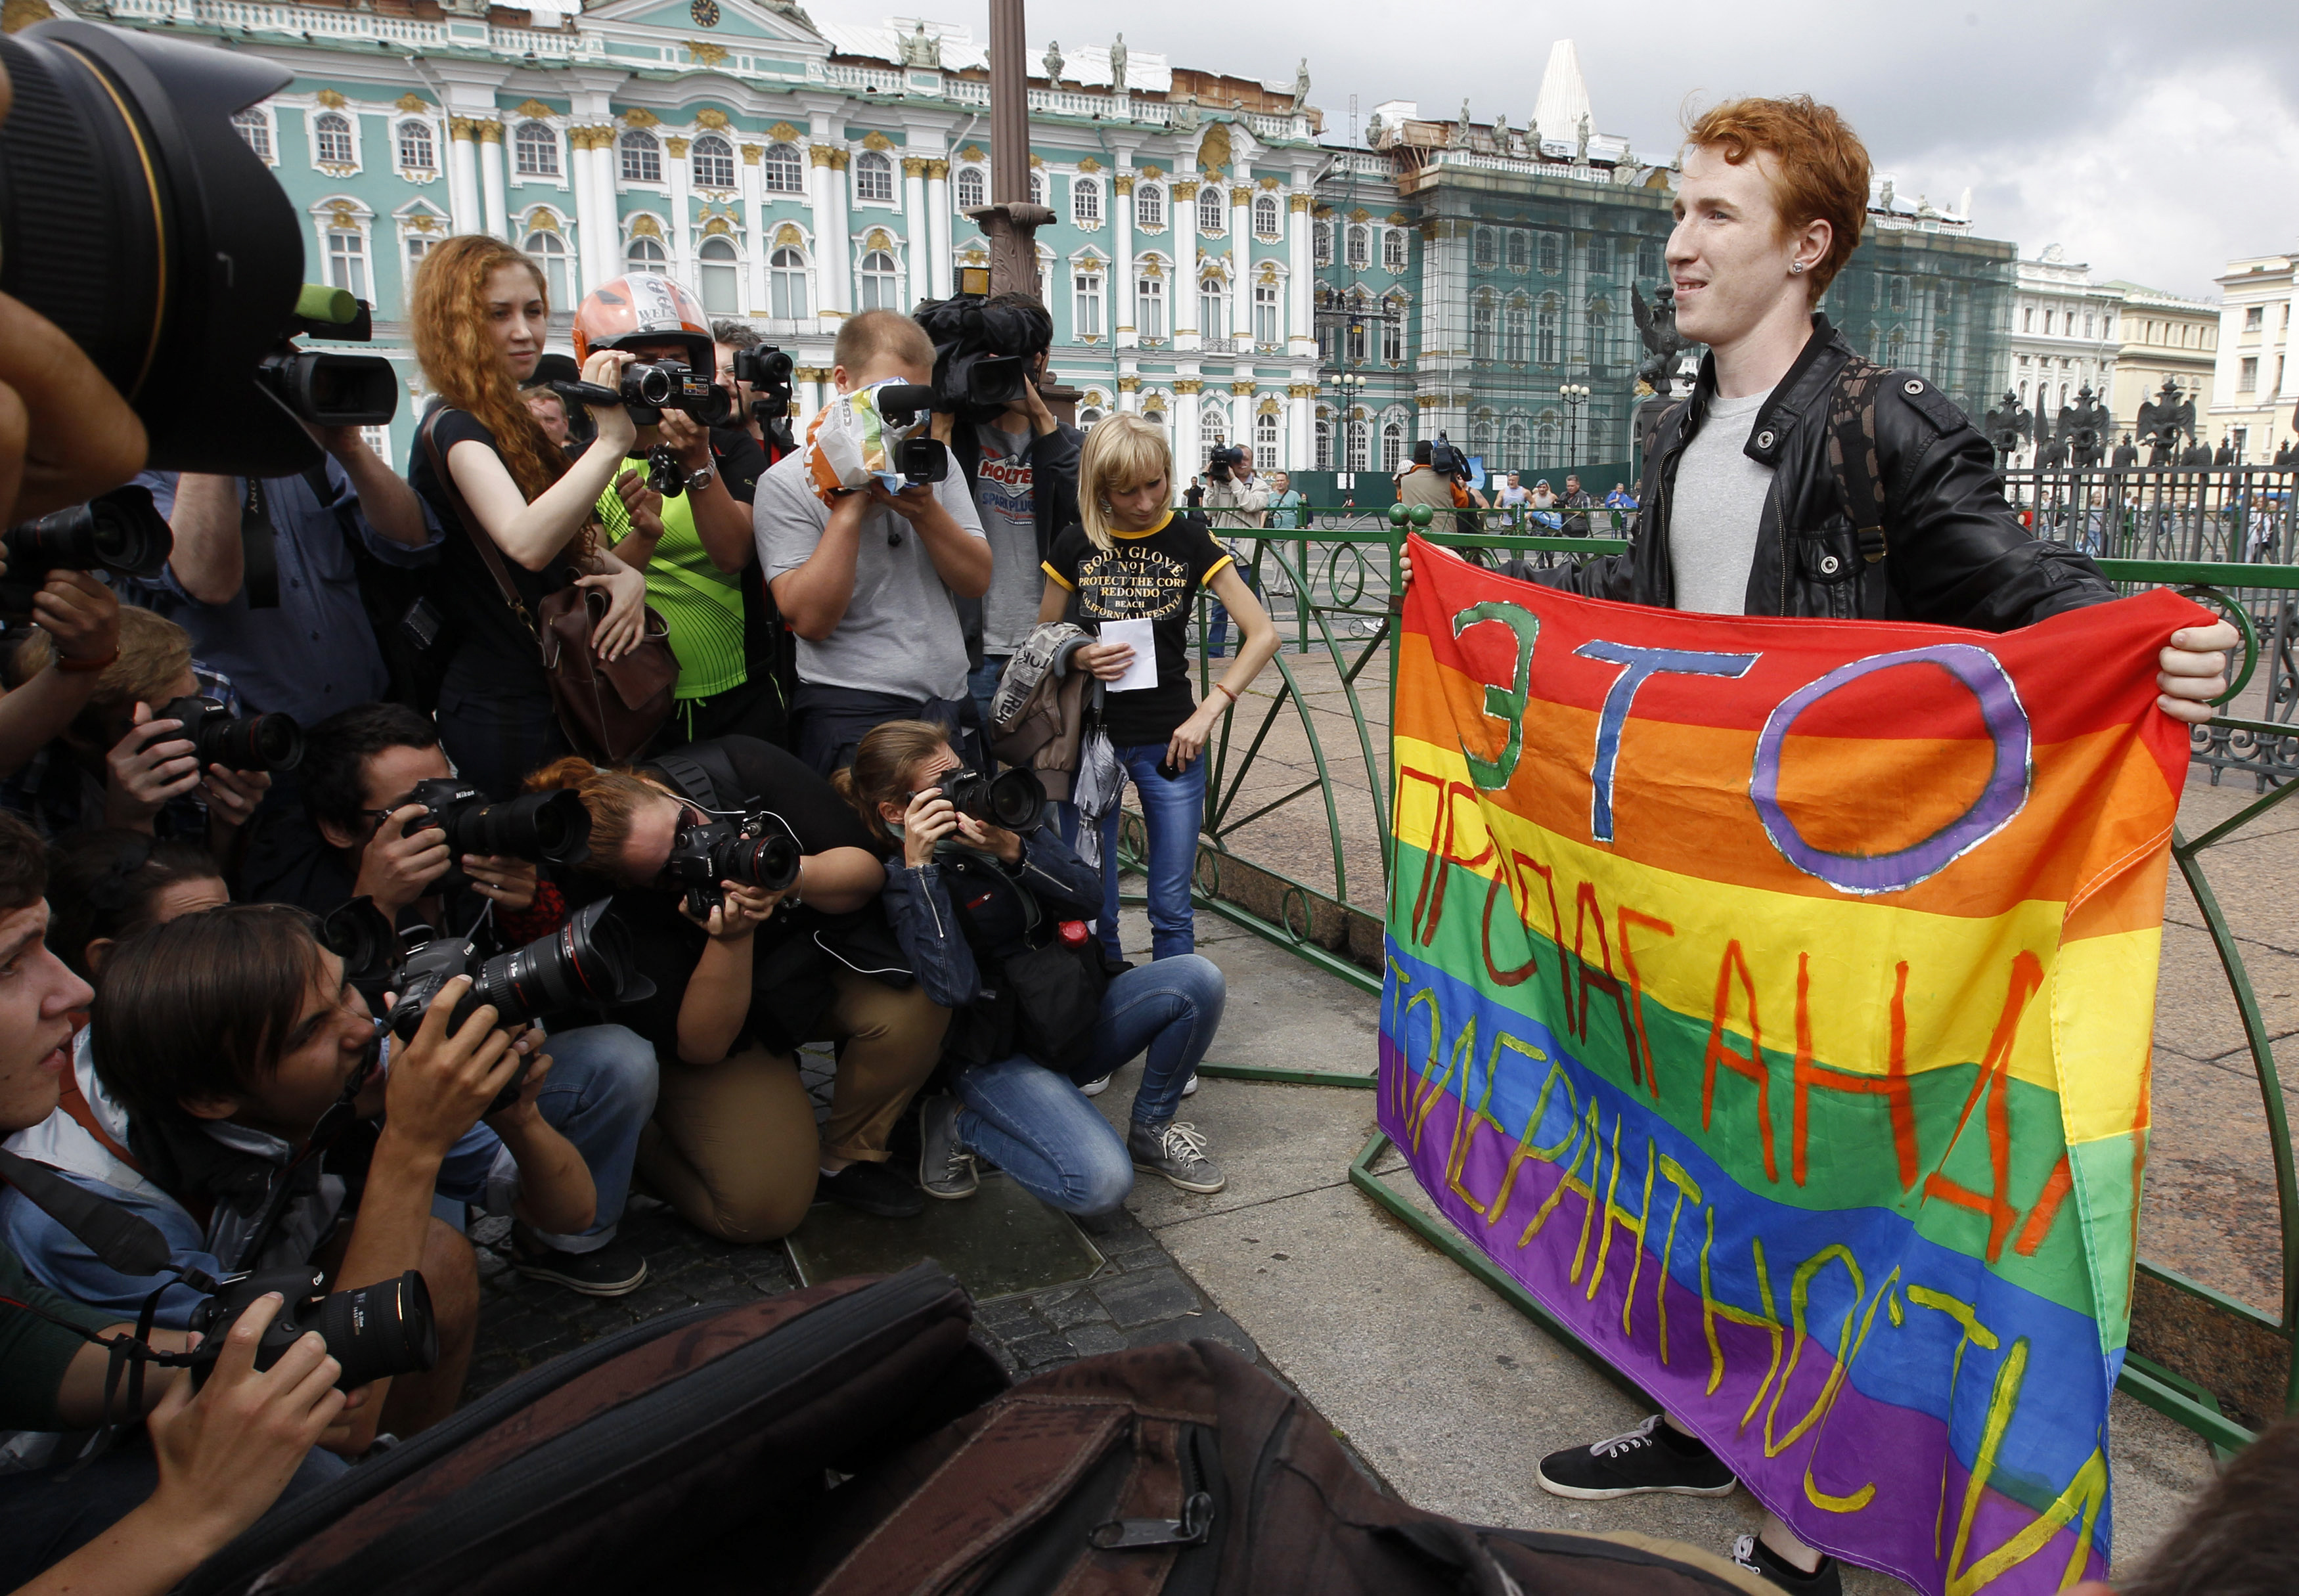 2 August 2013, Russia. Kirill Kalugin, an LGBT rights activist, poses for press during a one-man protest in St. Petersburg with a banner that reads, “This is propagating tolerance.